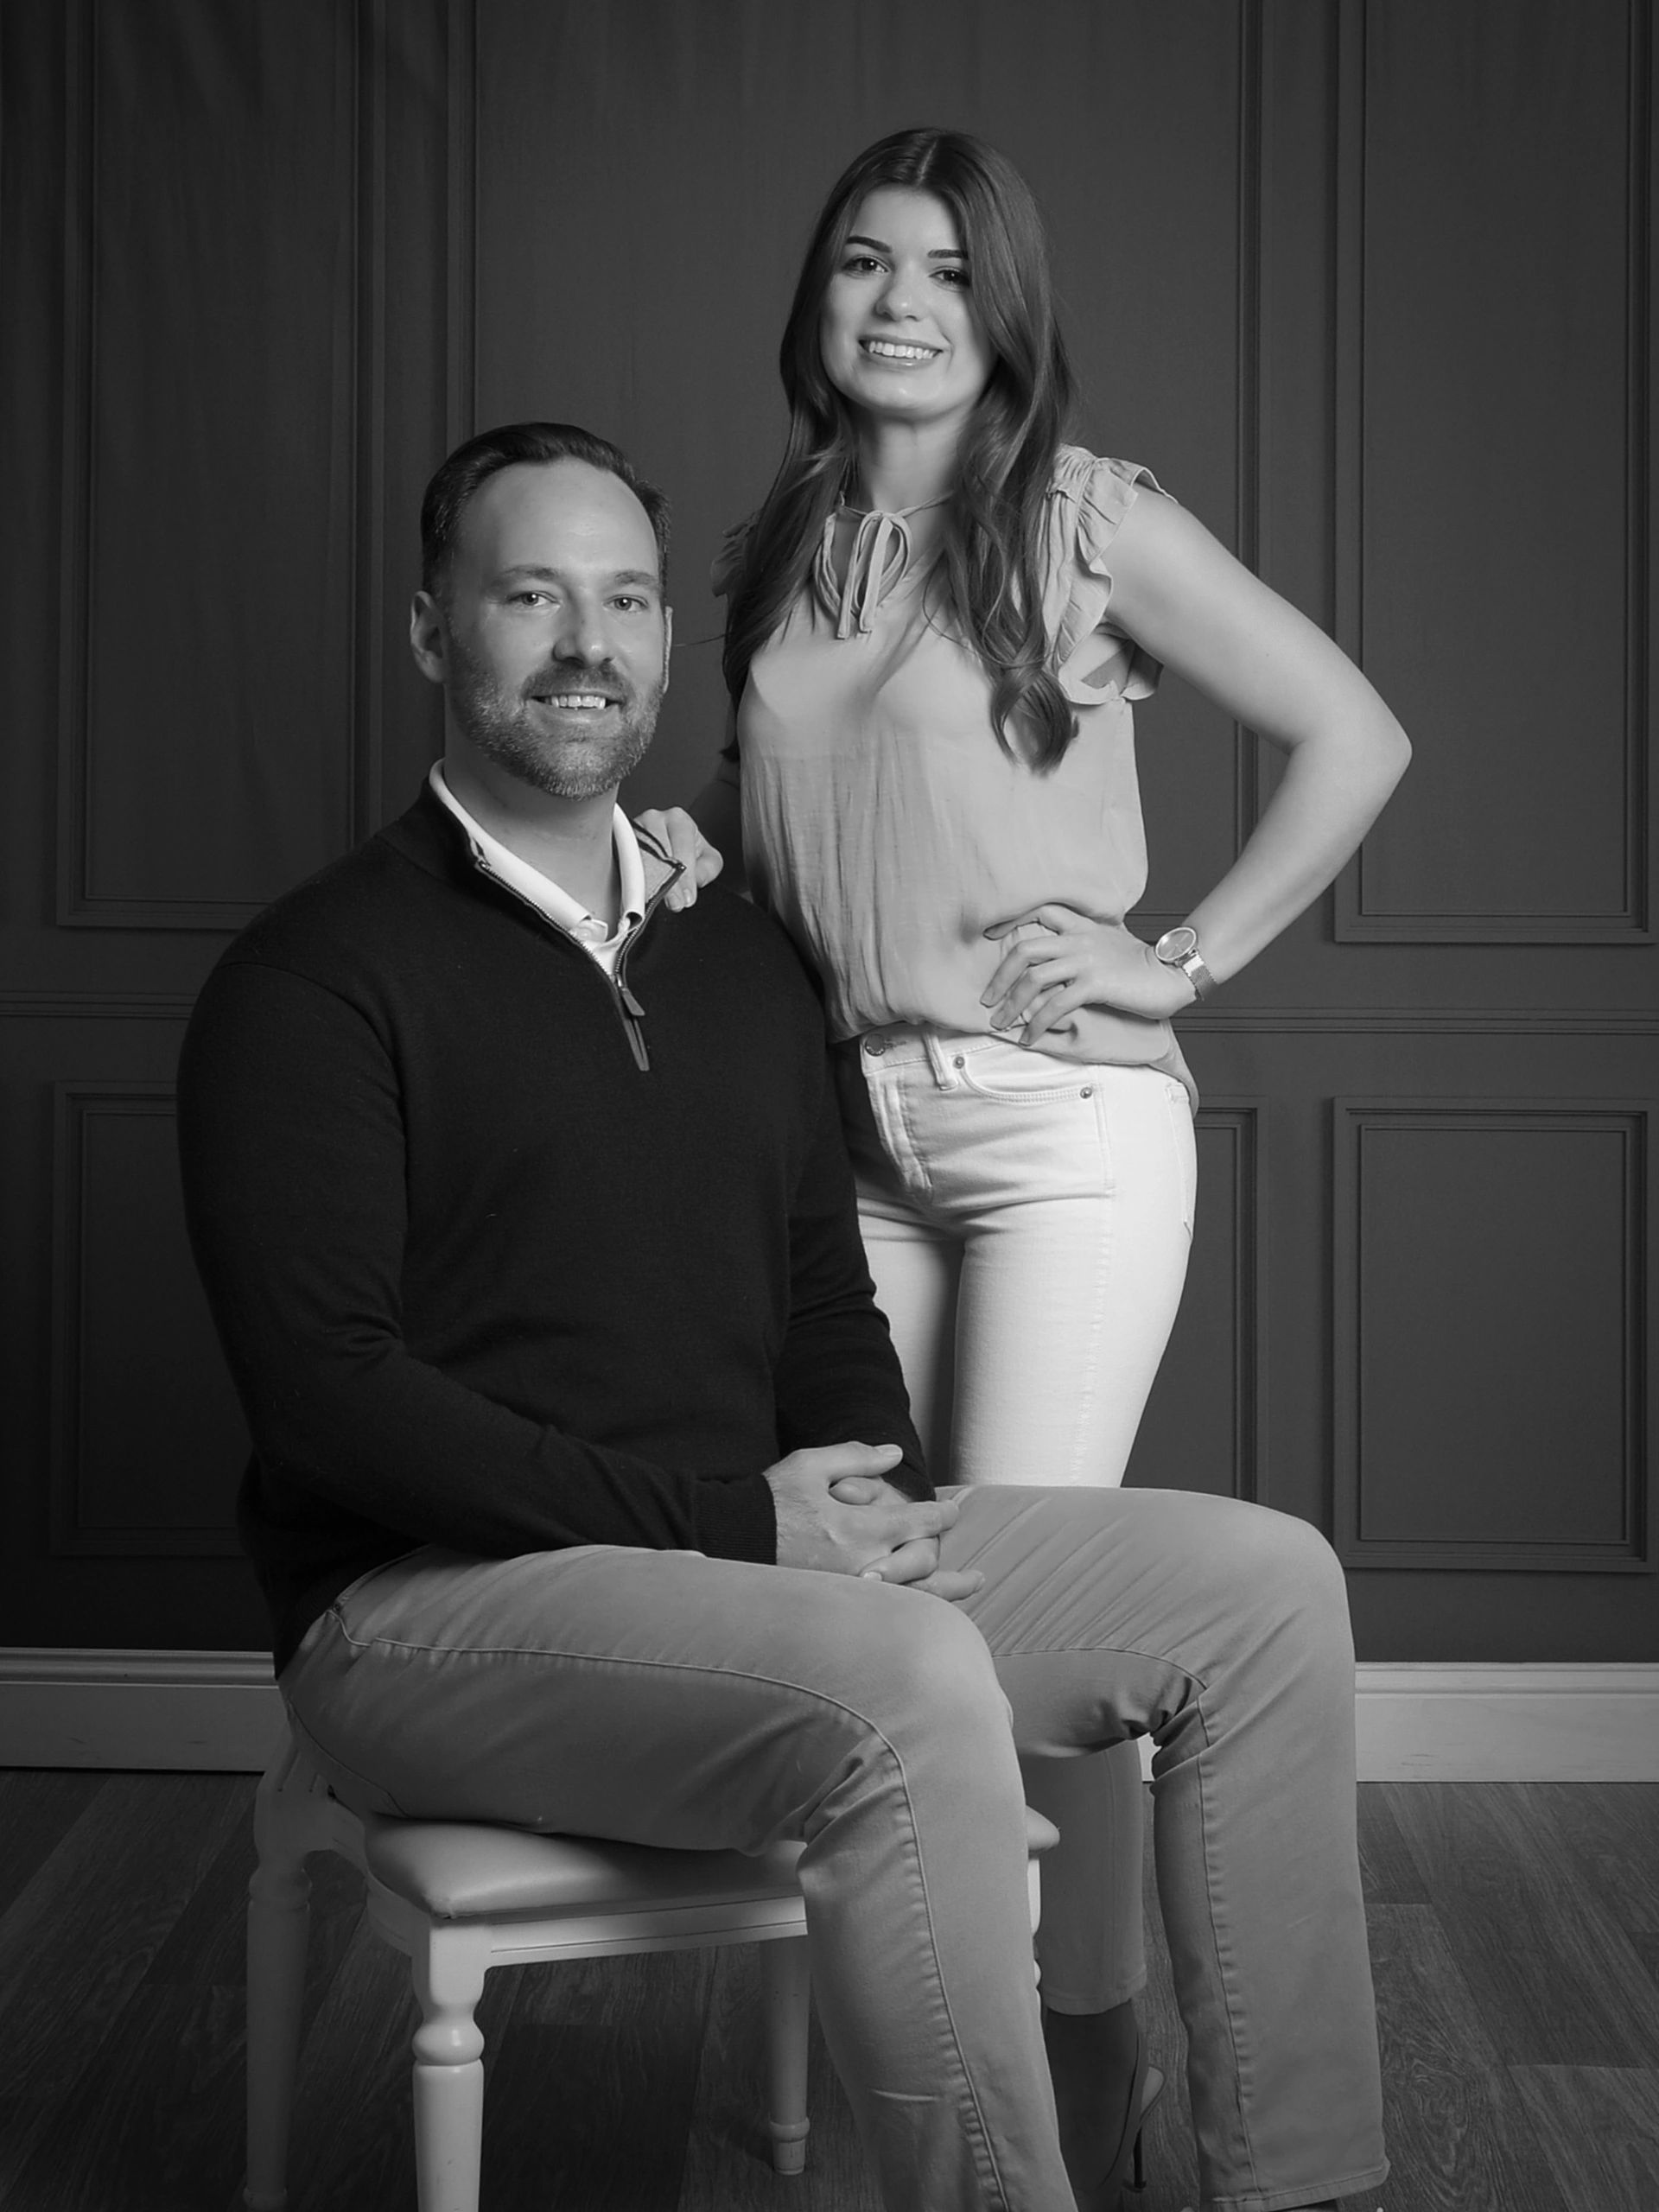 Owners Tim Magoon and Ashley Fox